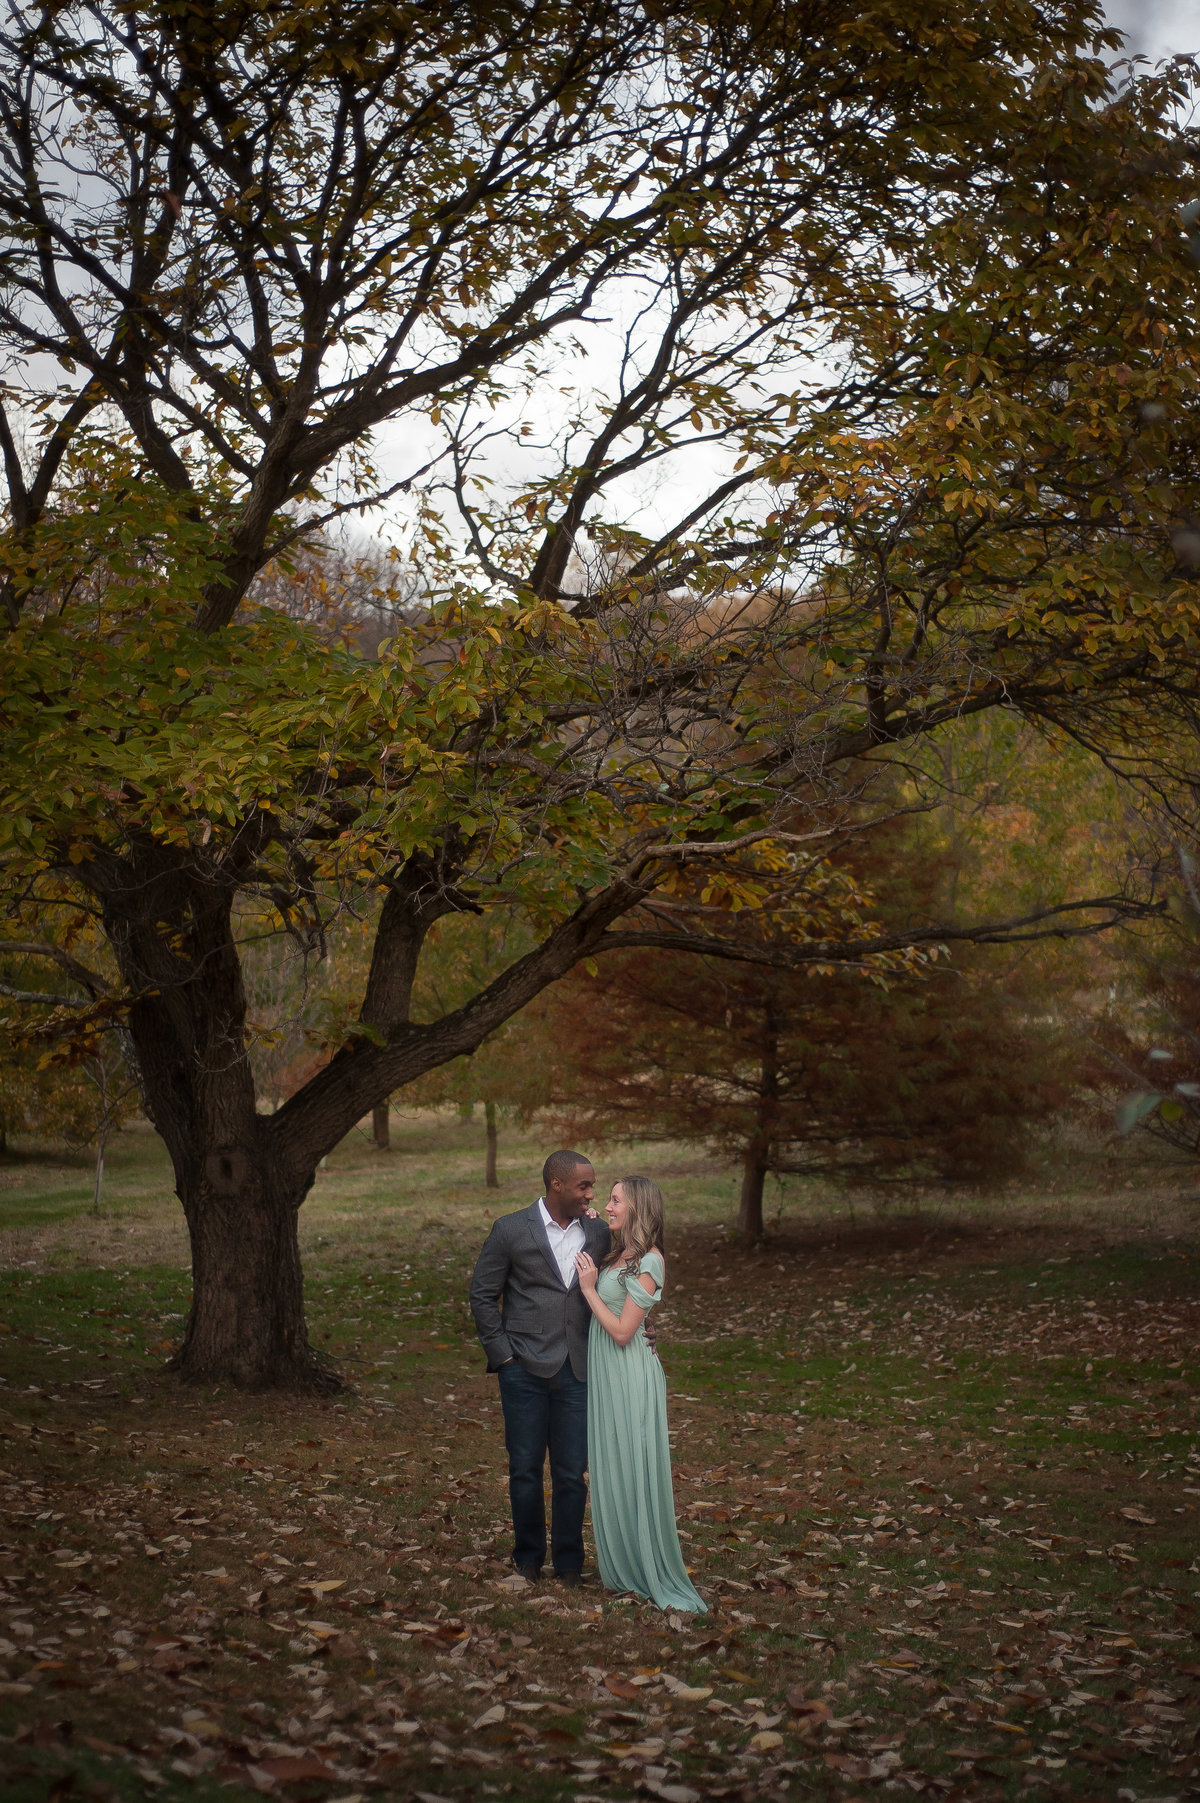 marcy+grant_engaged_jtp2016-128